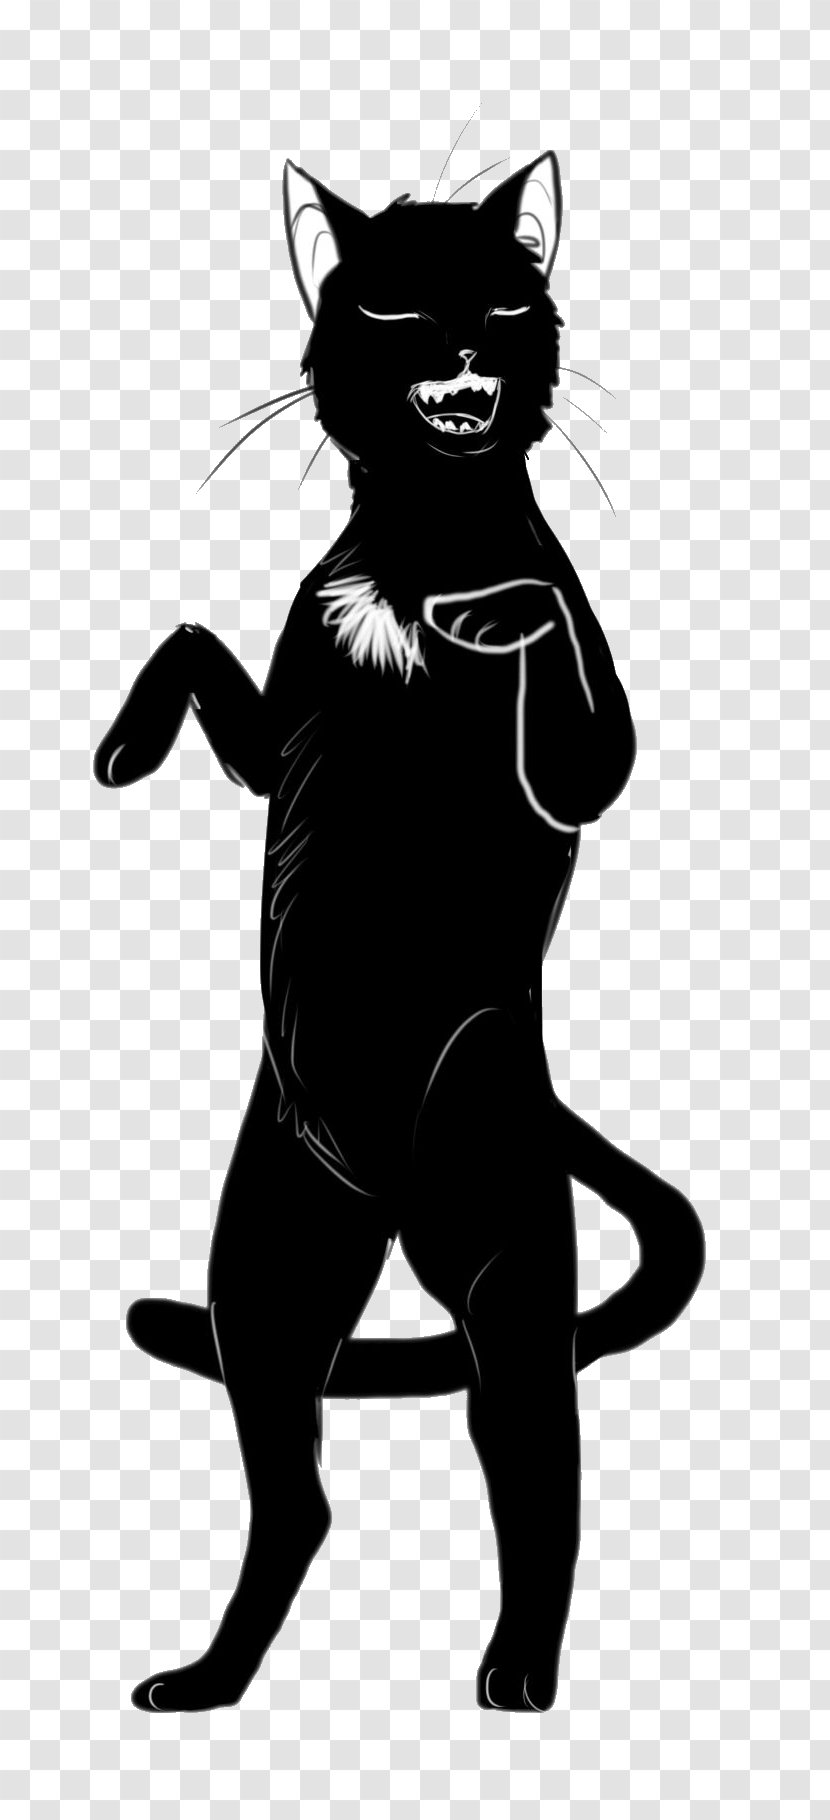 Whiskers Domestic Short-haired Cat Silhouette Clip Art Transparent PNG